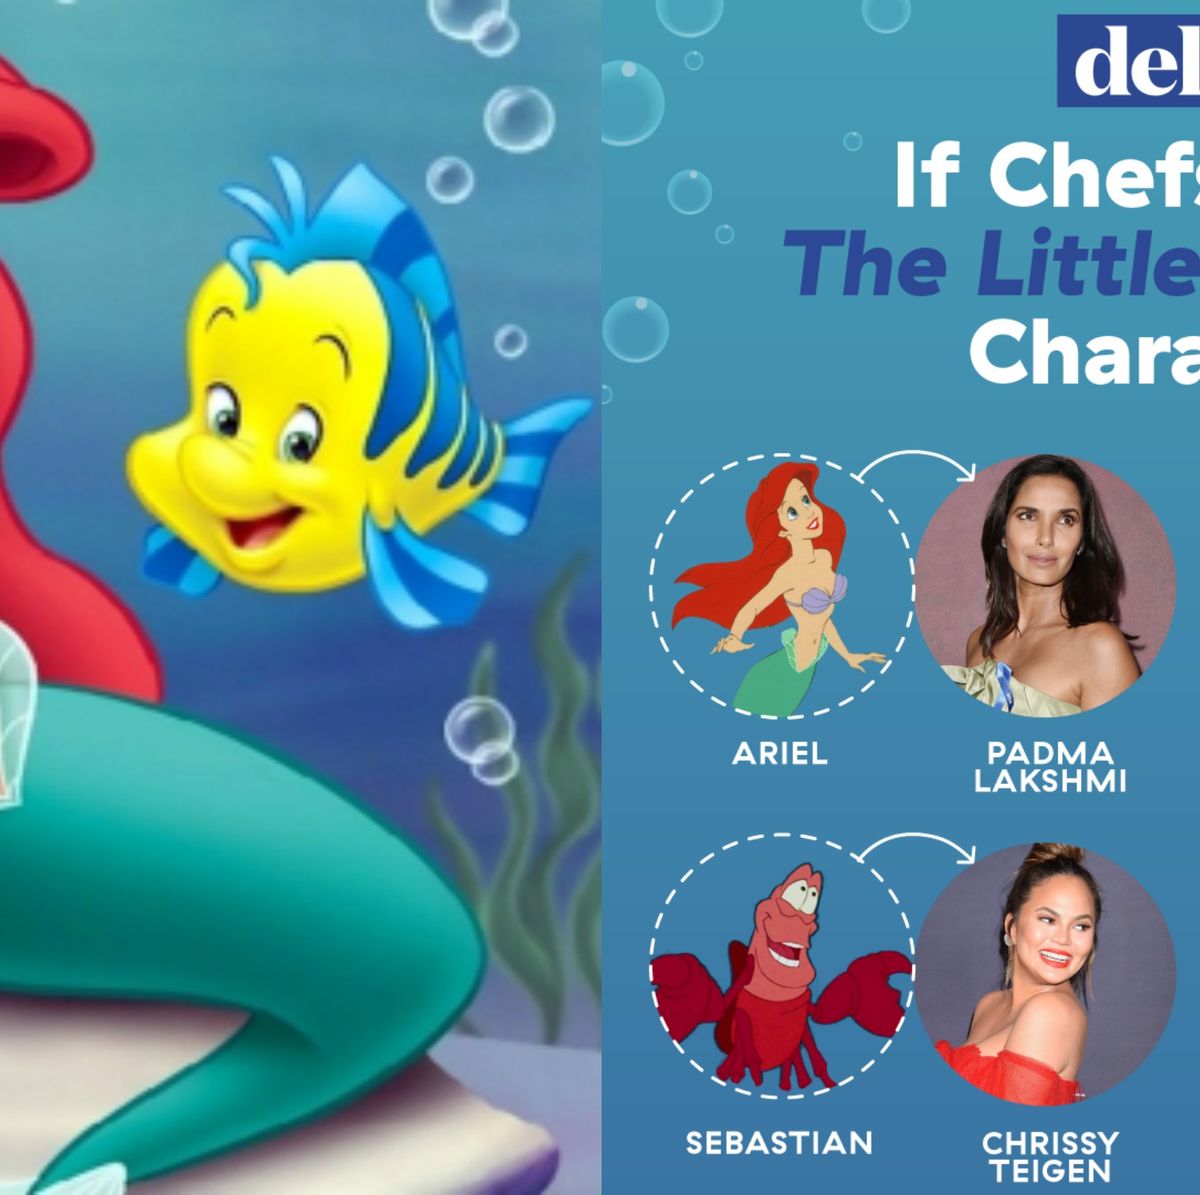 Disney's 'Little Mermaid' Live Action Cast and Characters